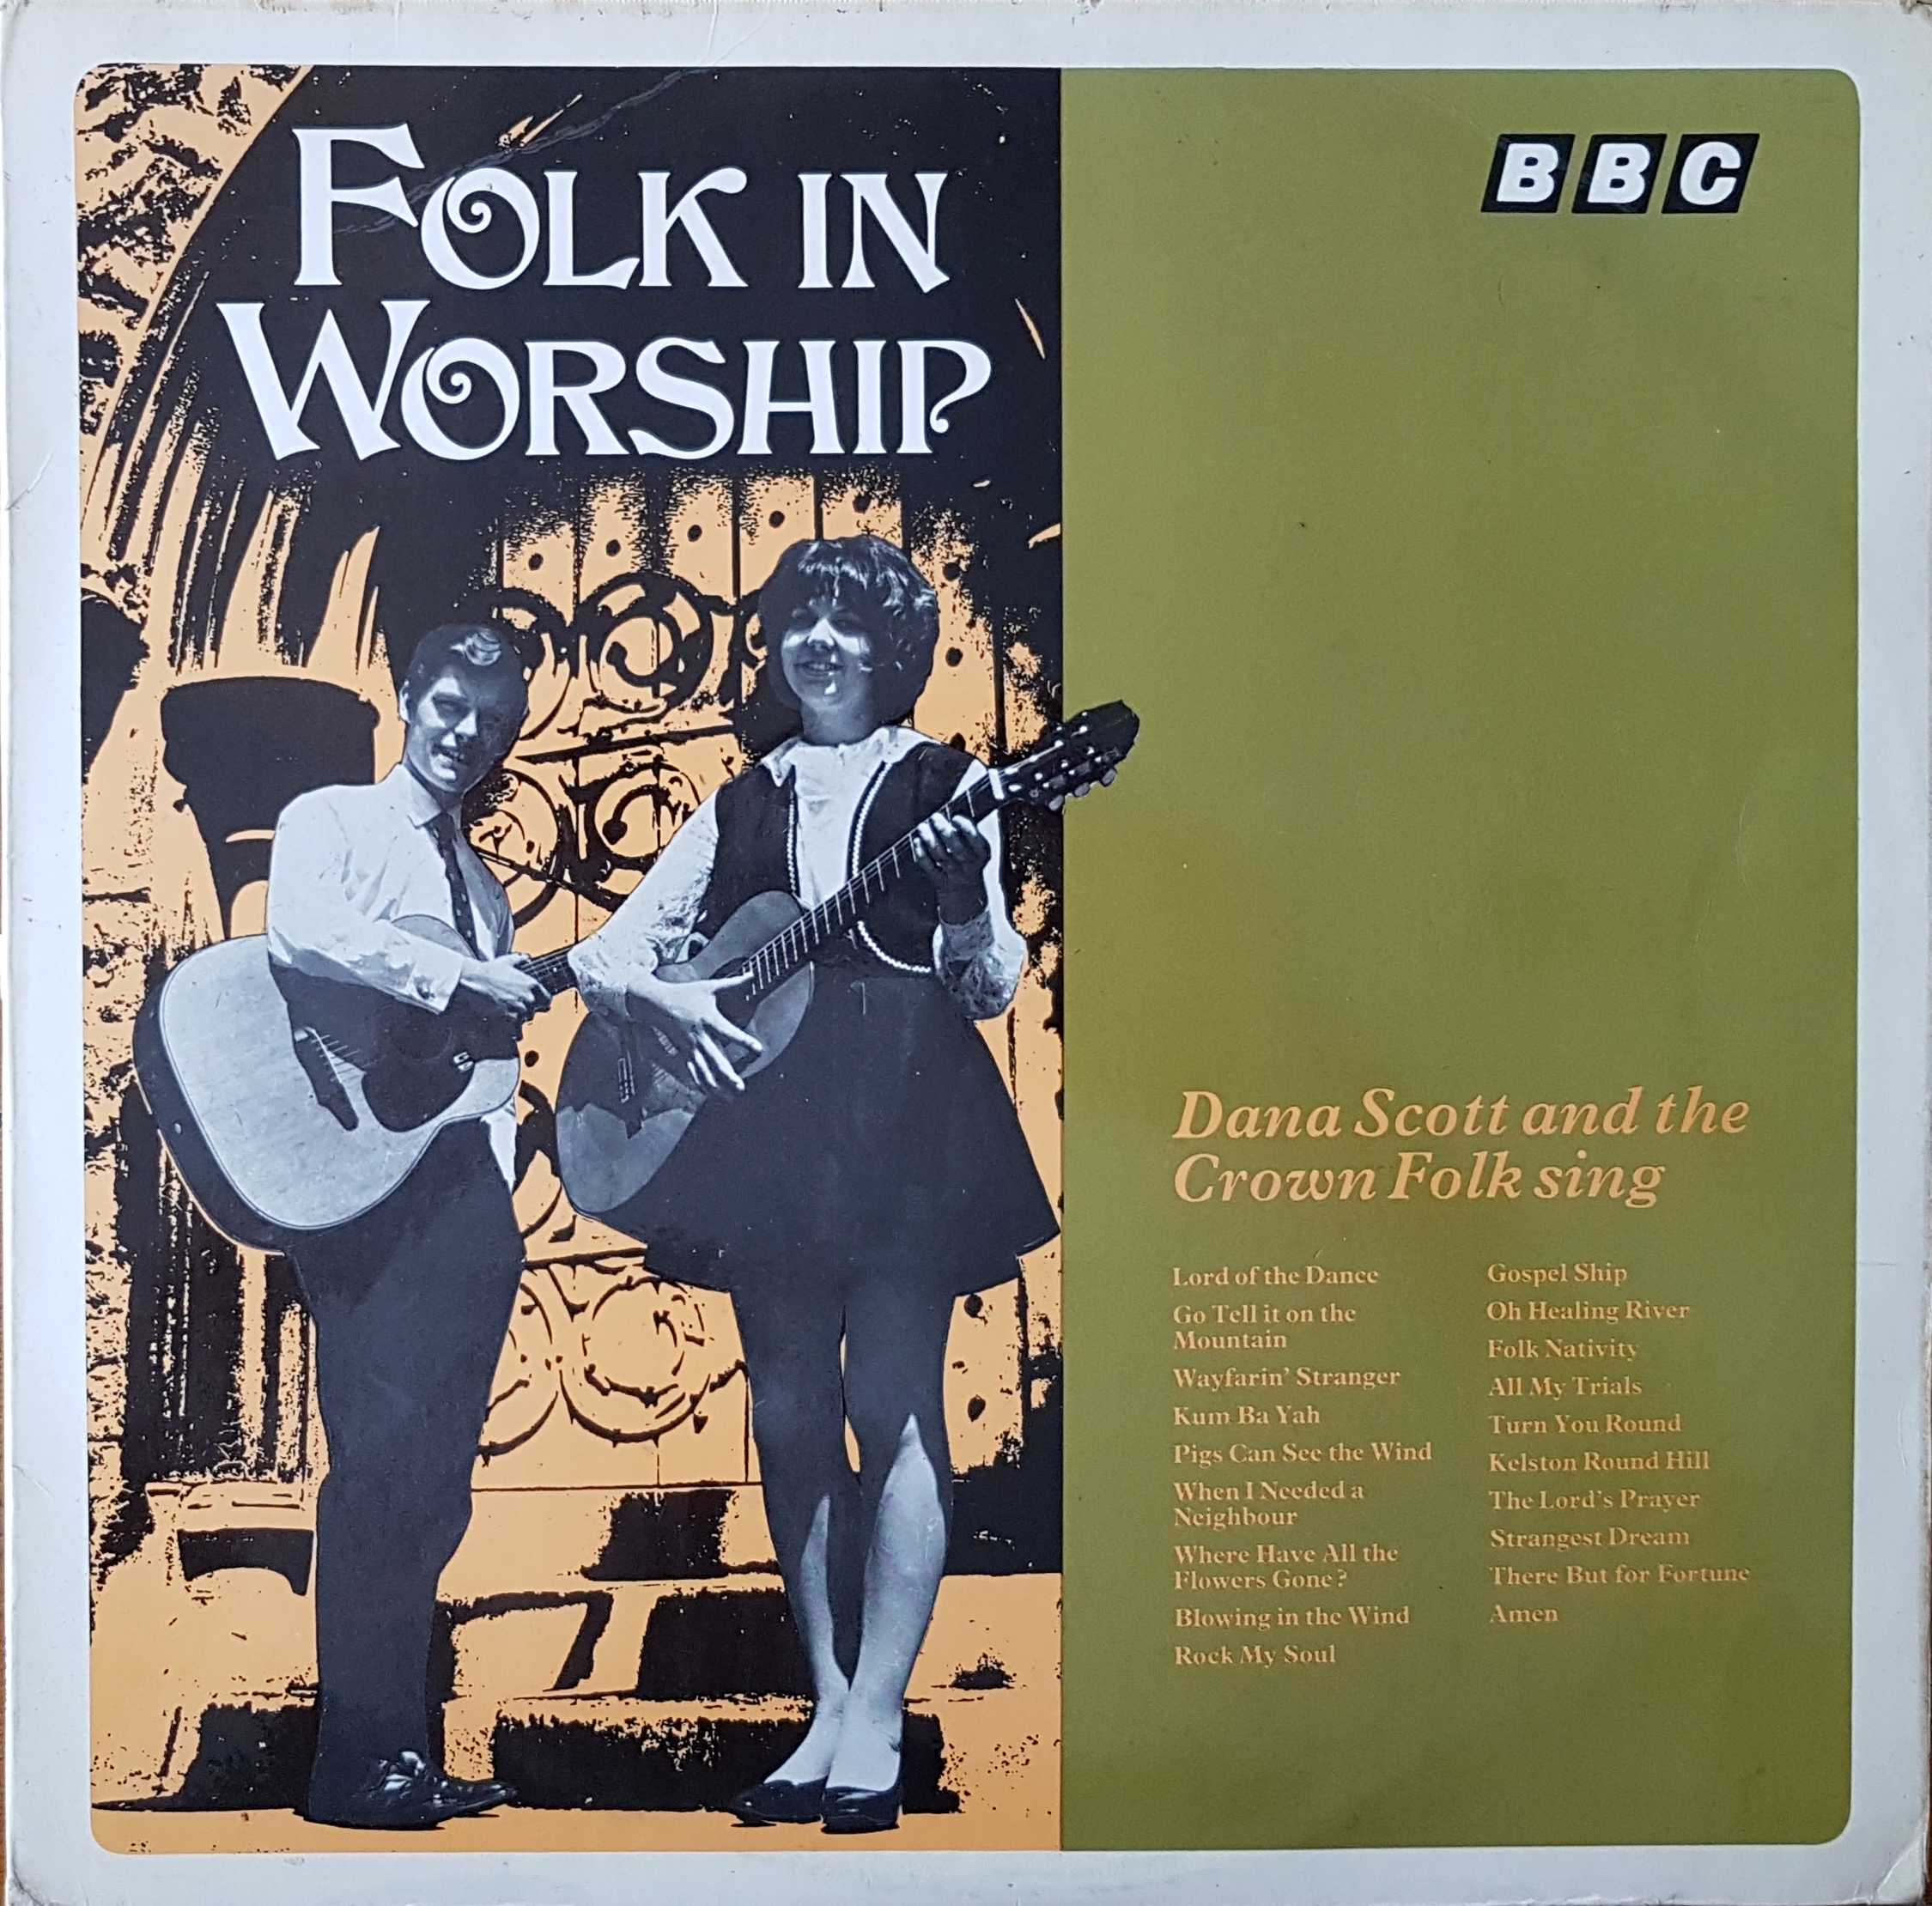 Picture of REC 58 Folk in Worship by artist Various from the BBC albums - Records and Tapes library